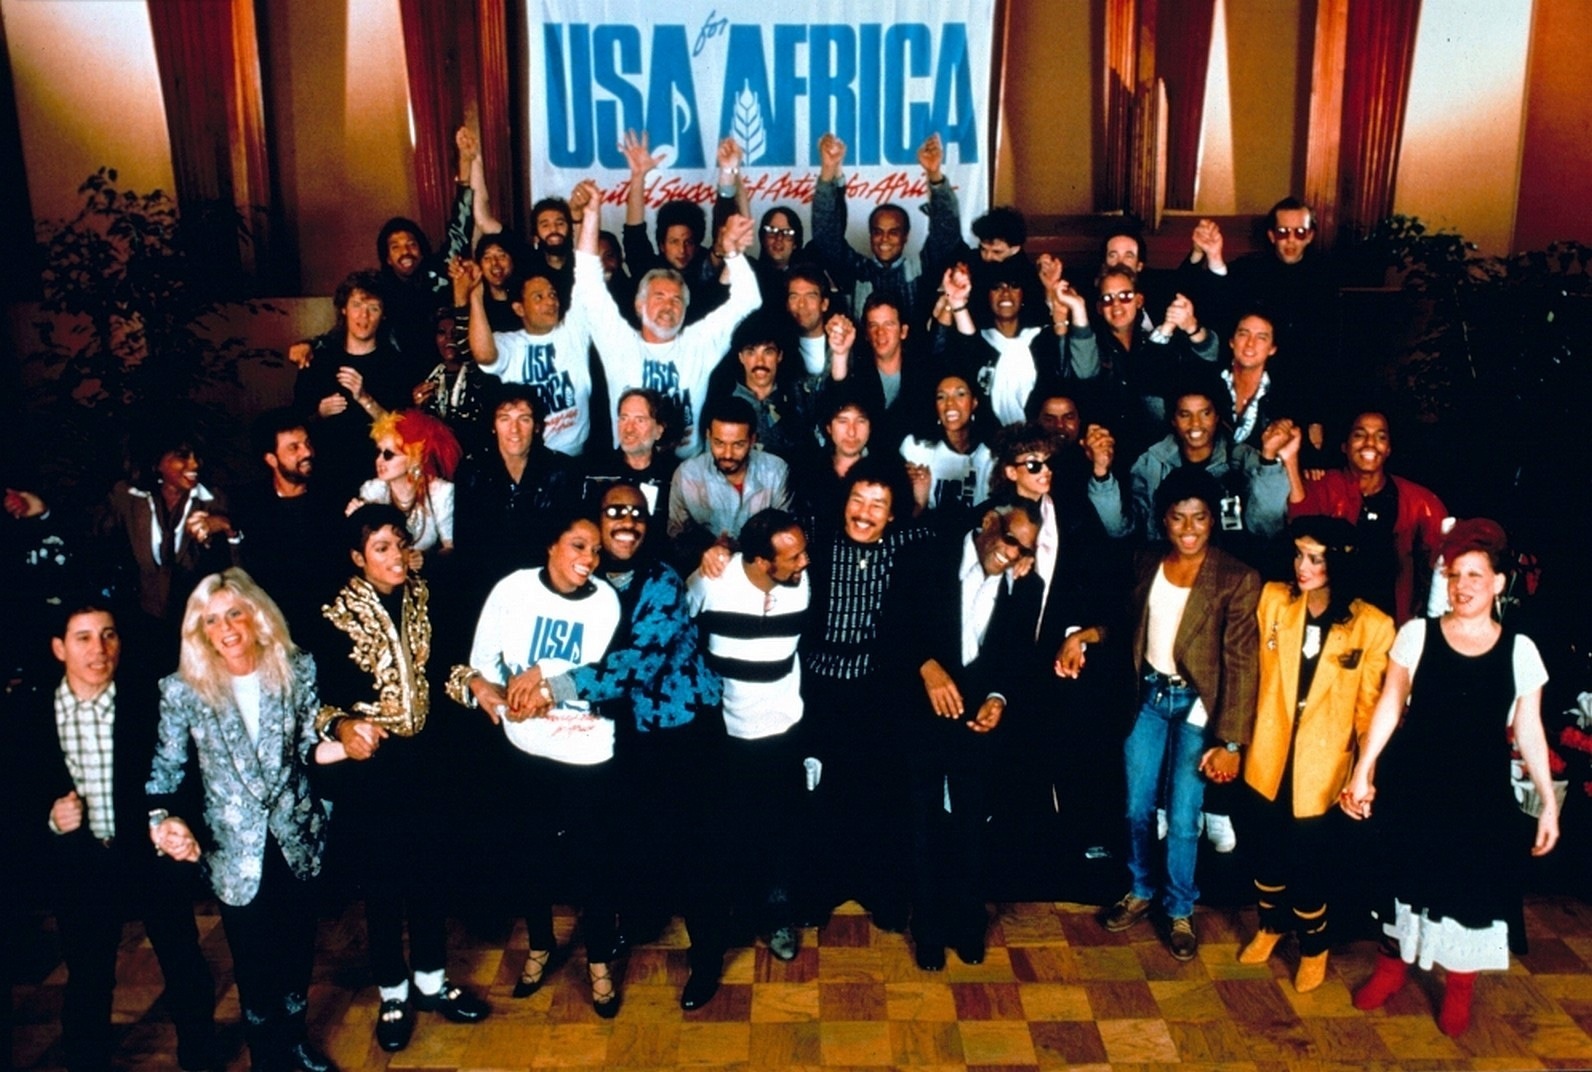 USA for Africa. We are the world - Carlos Martin Huerta